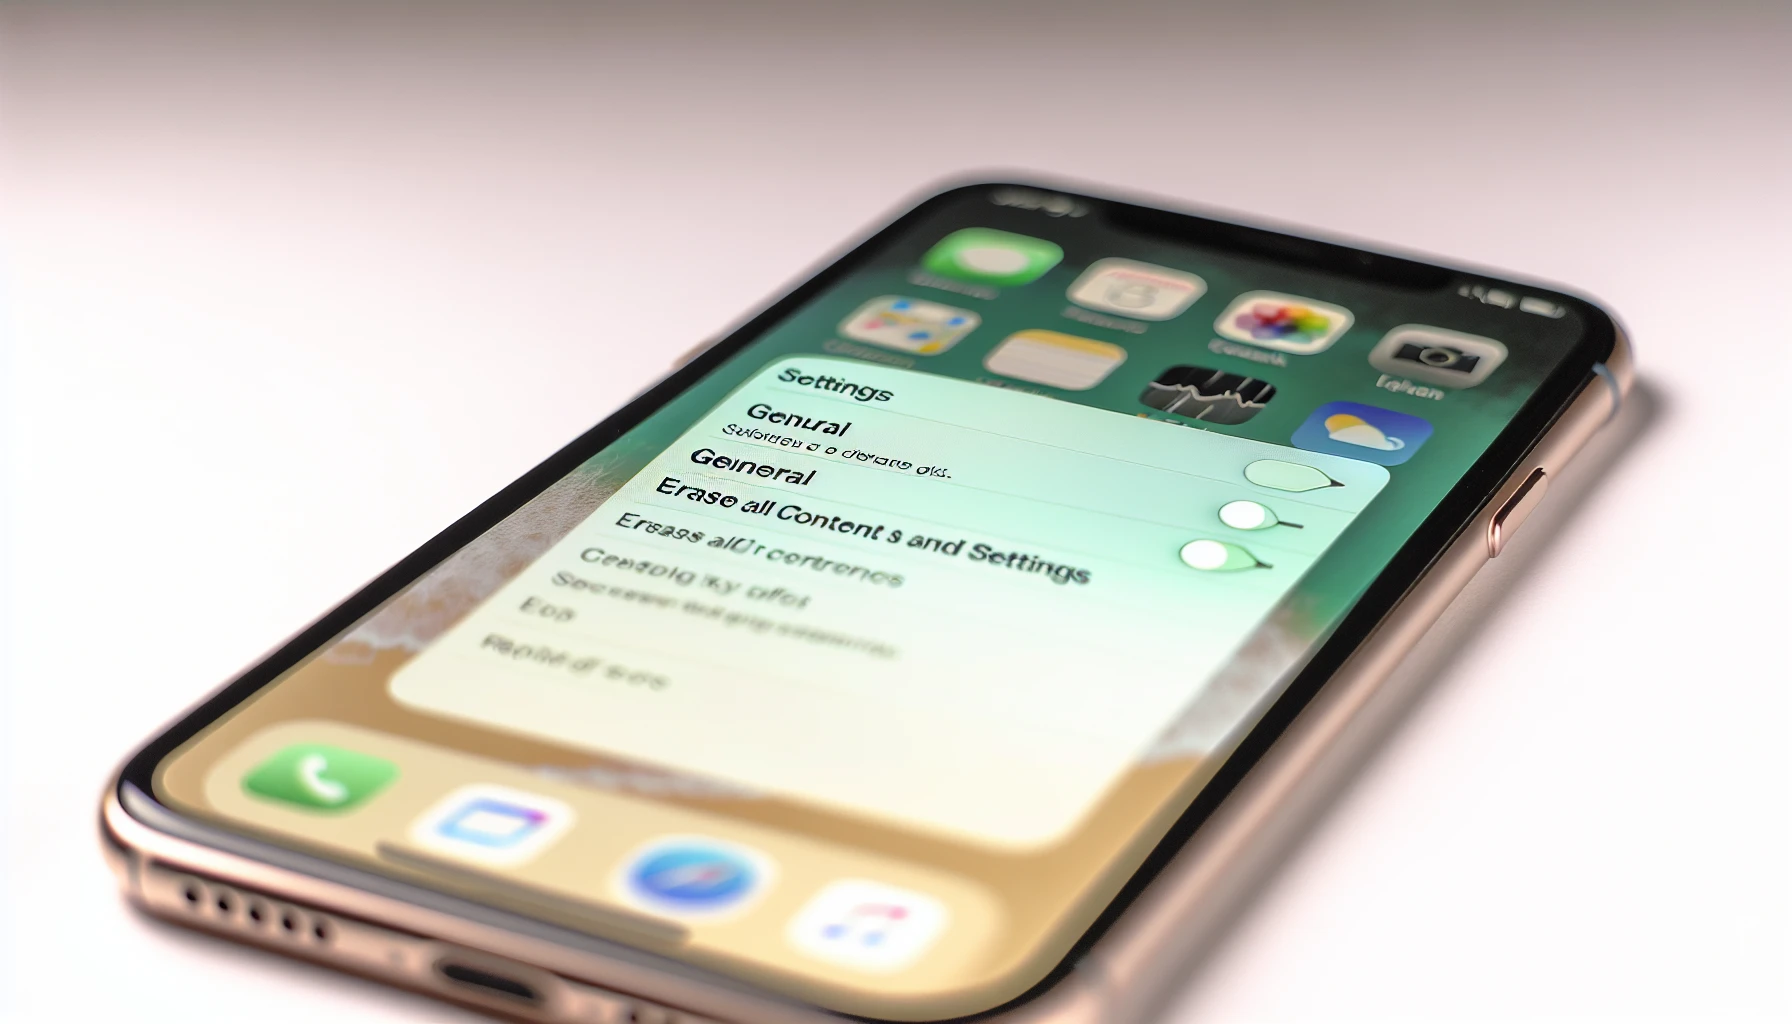 Older model iPhone being reset with 'Erase All Content and Settings' option